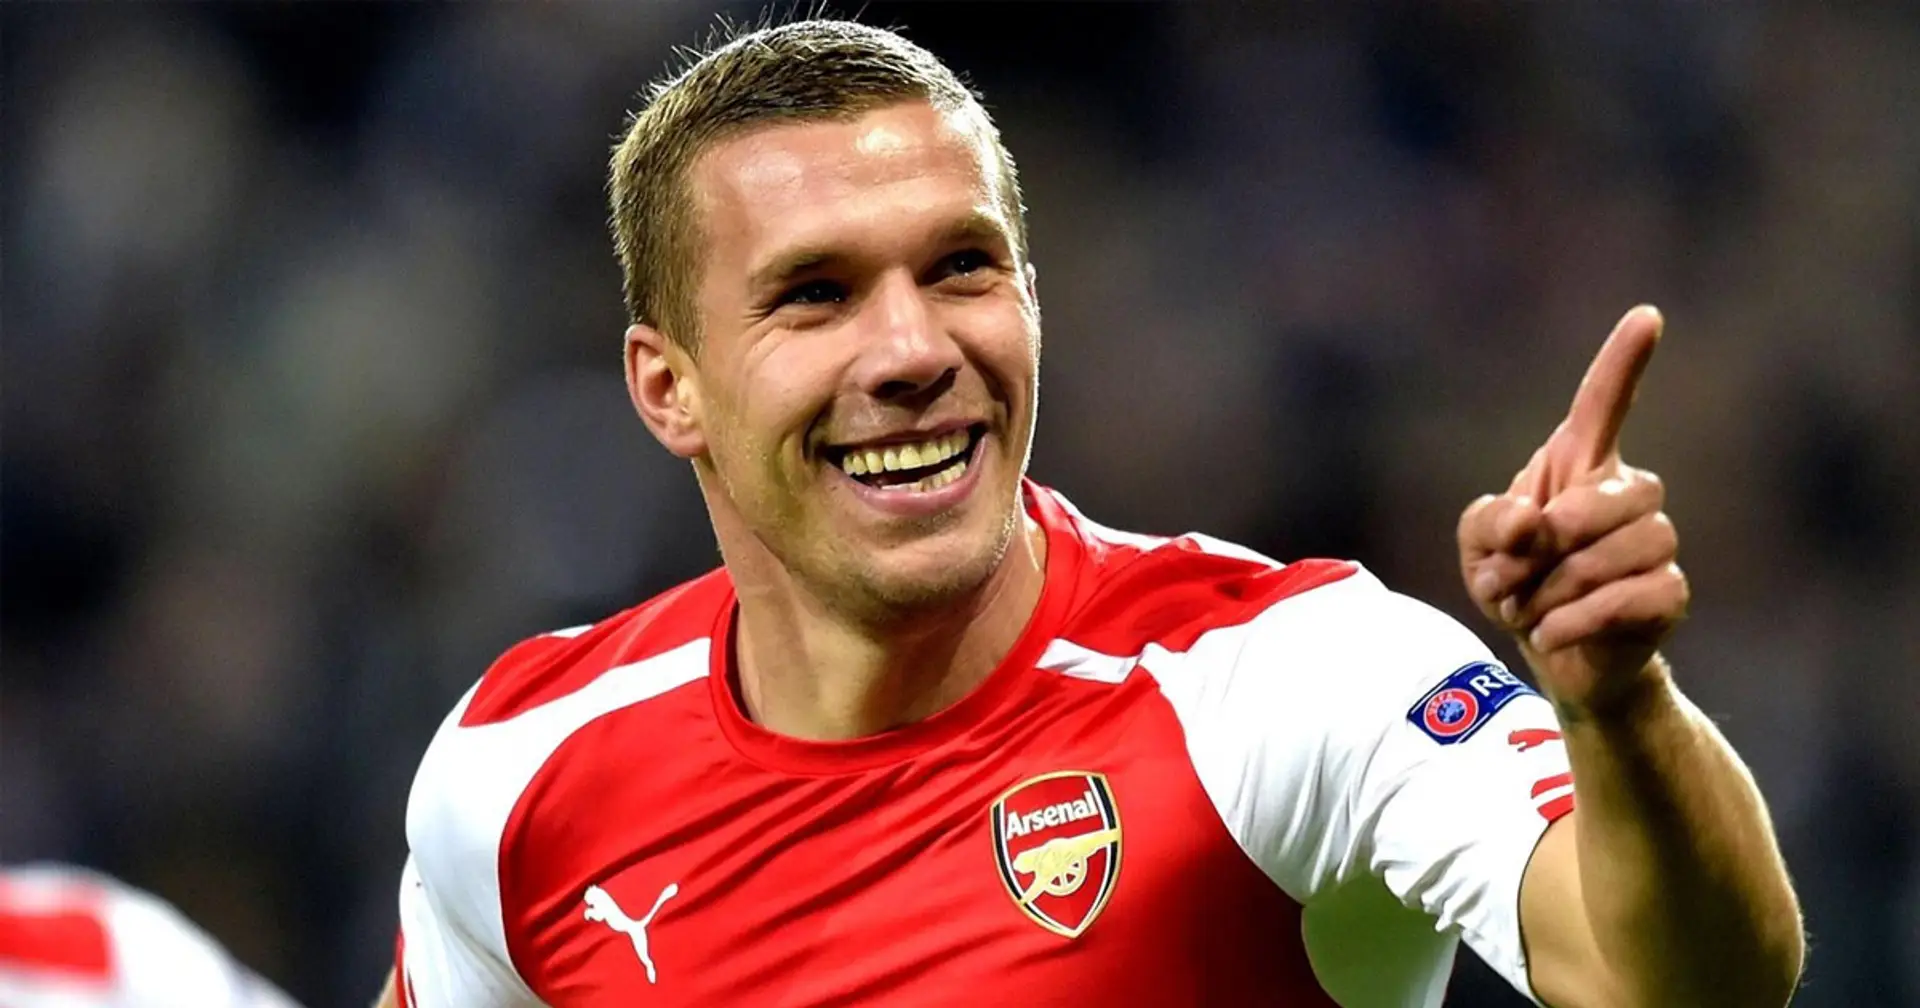 Podolski lifts lid on his Arsenal exit: 'I didn't want to but I had to'